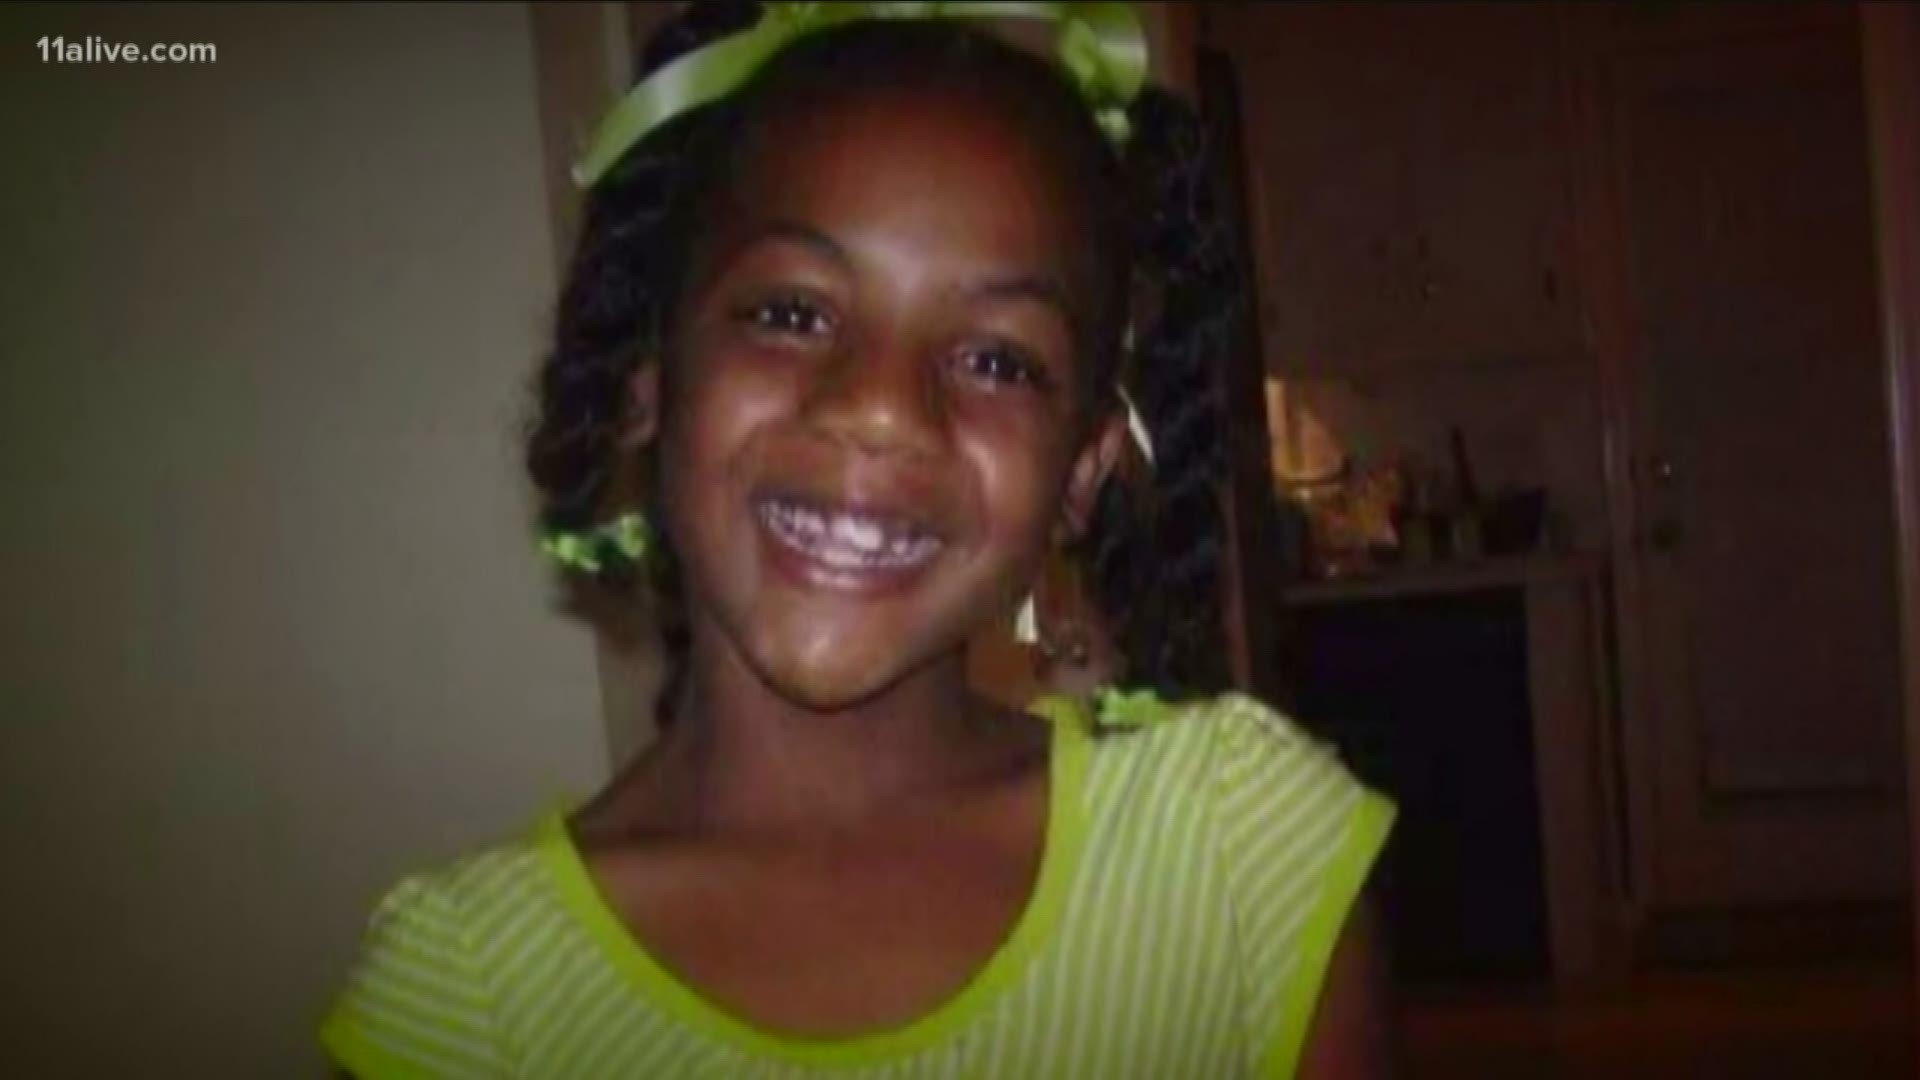 Tiffany Moss was found guilty of killing Imani Moss.